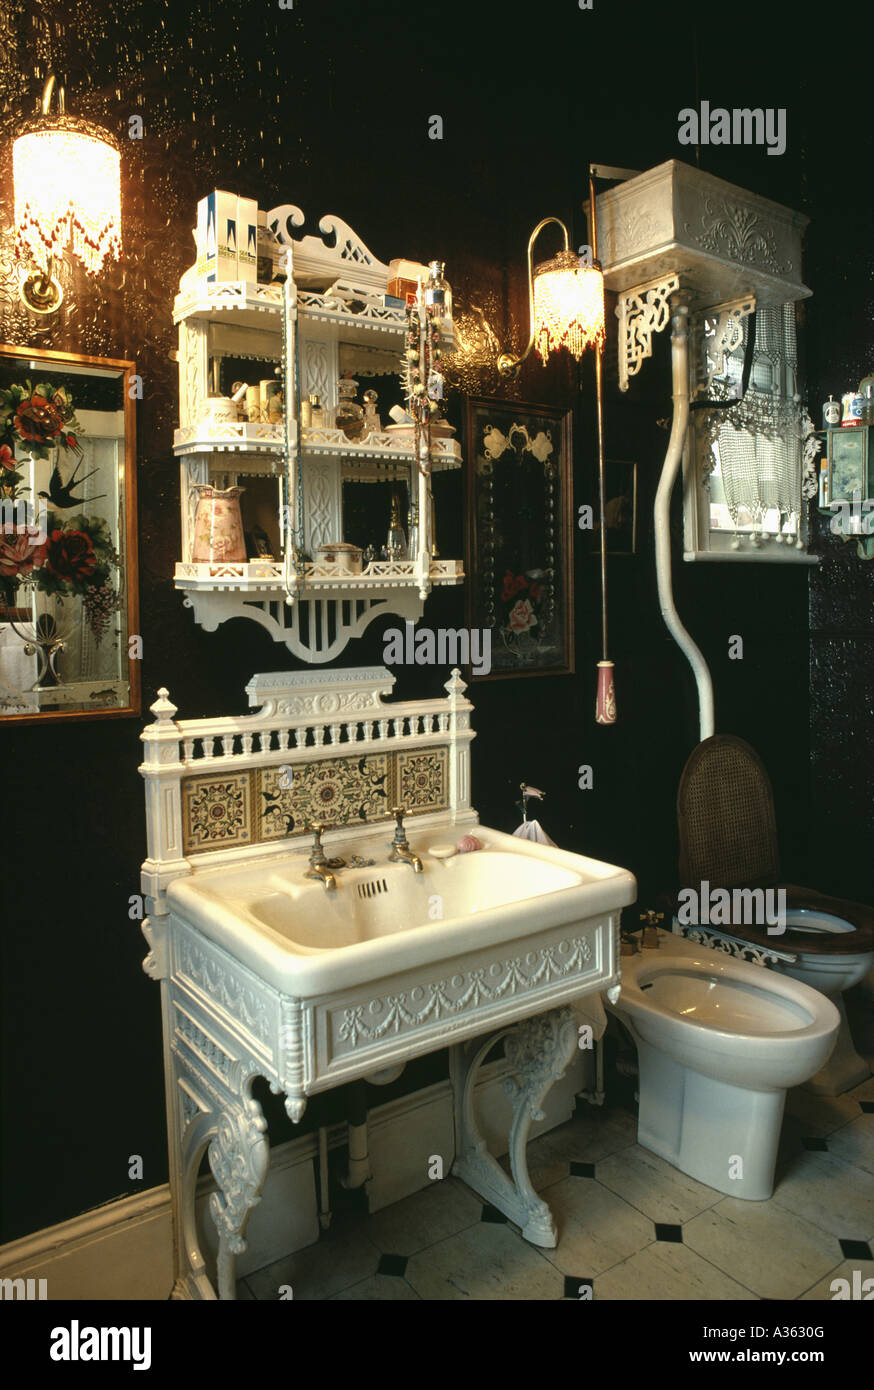 Antique Shelf Unit Above Victorian Basin In Bathroom With